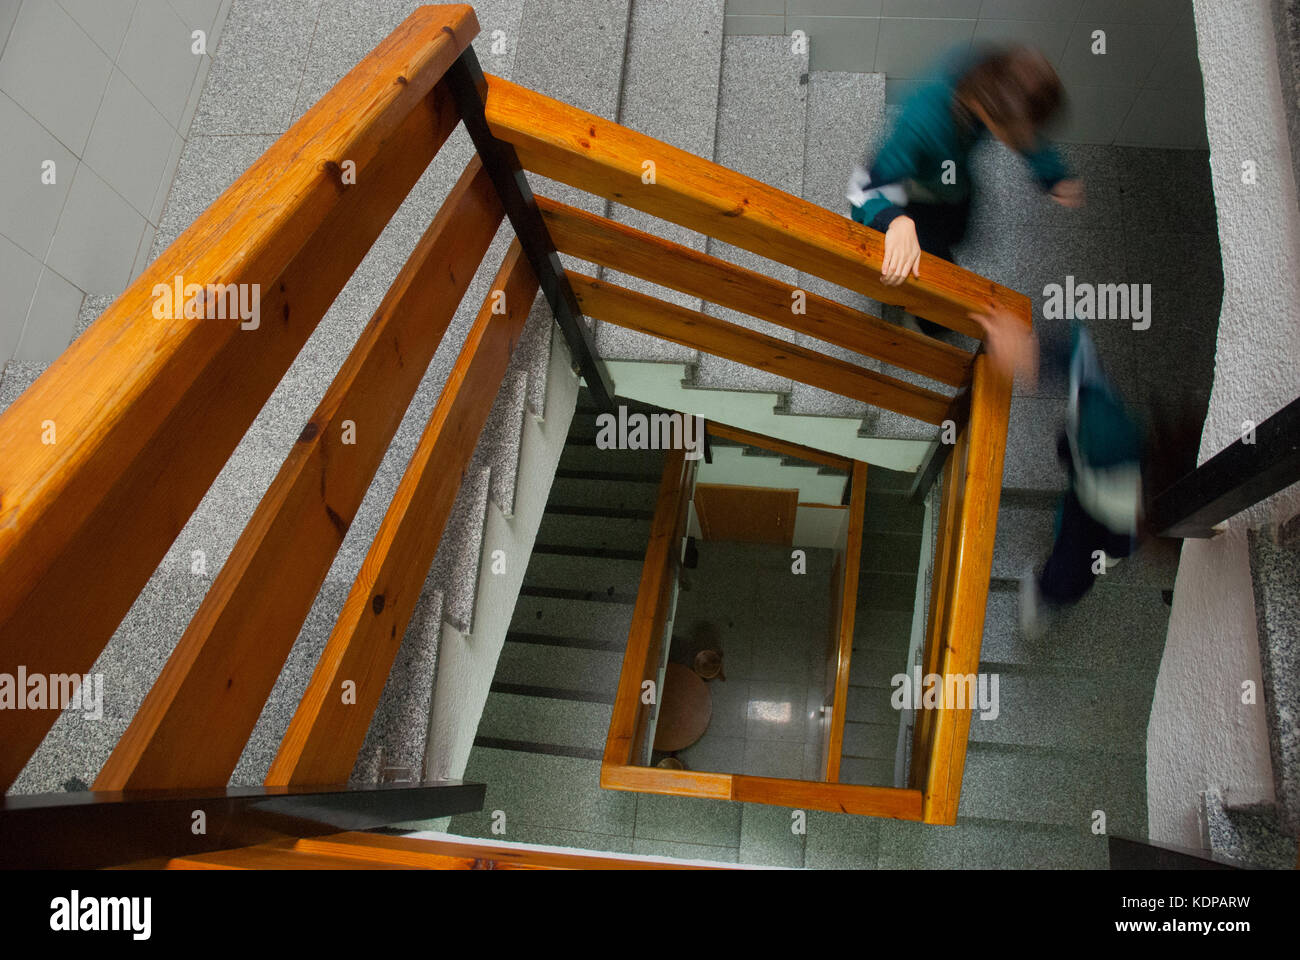 Stairs, view from above. Stock Photo